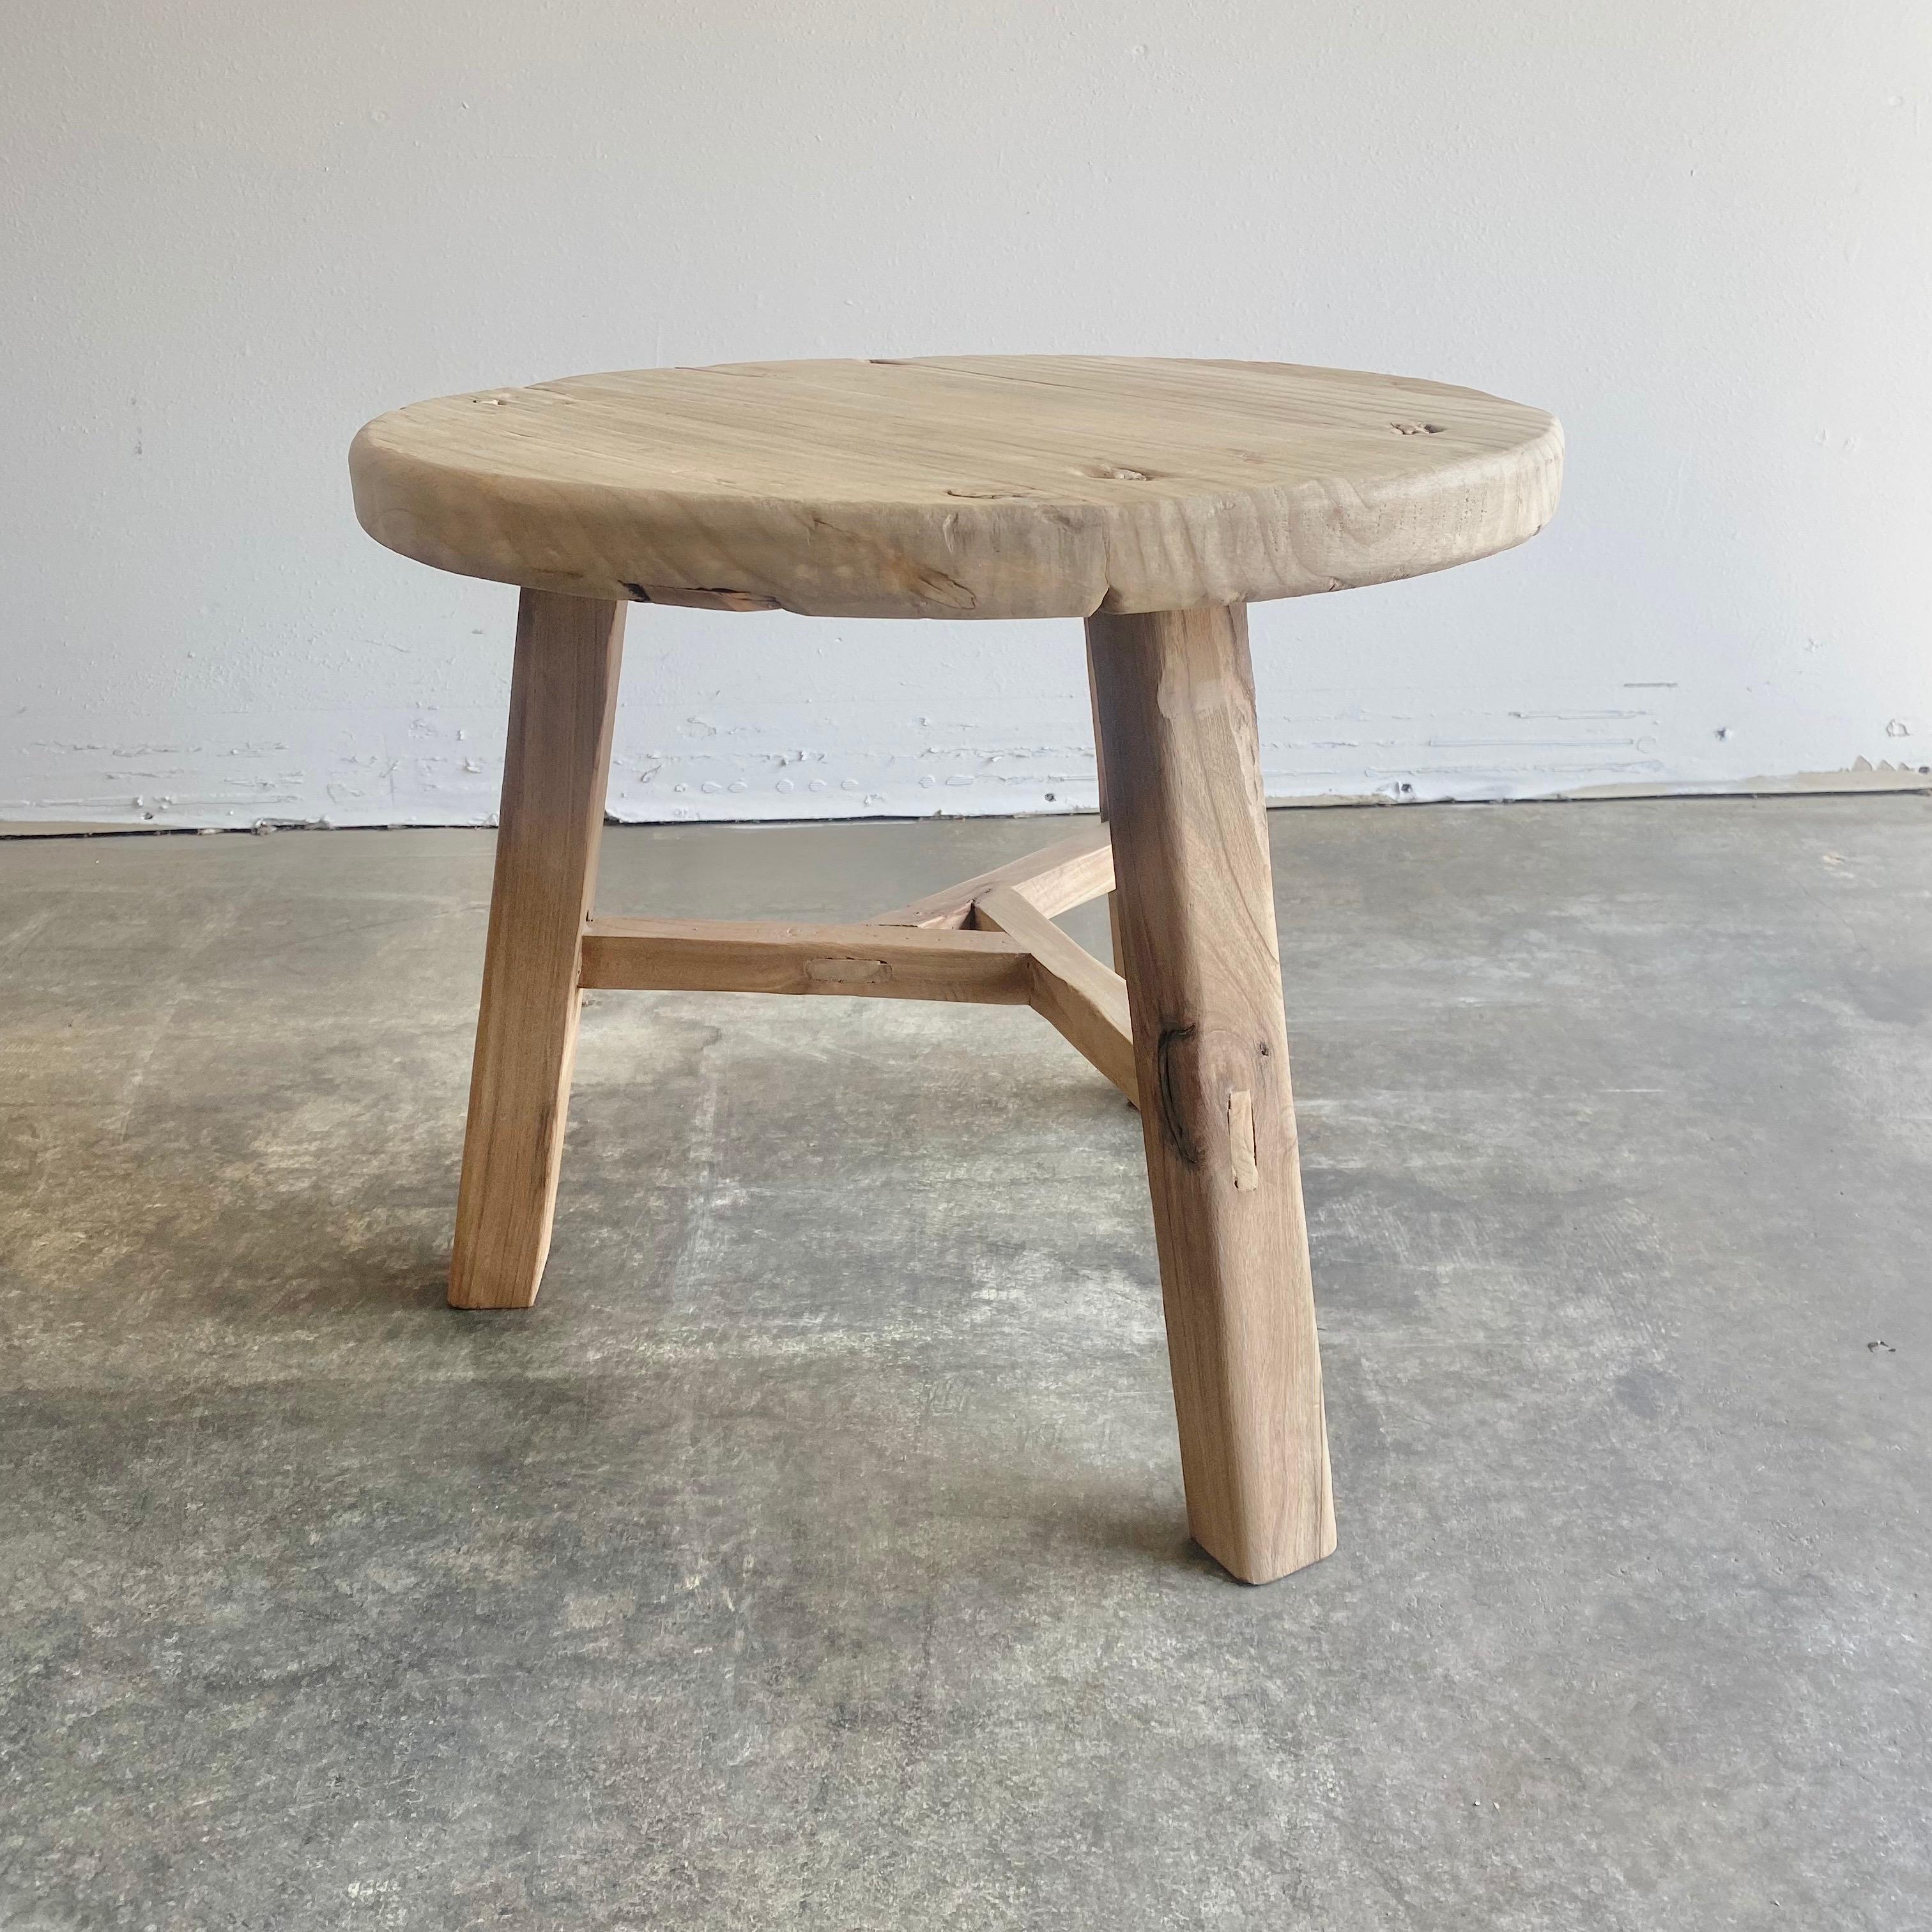 Round natural side table made from reclaimed elmwood Raw natural finish, a warm honey with gray tones in the wood. Solid and sturdy, a great side table for next to a bed, sofa, chairs. Can be stained or painted for a customized look
 Size: 21